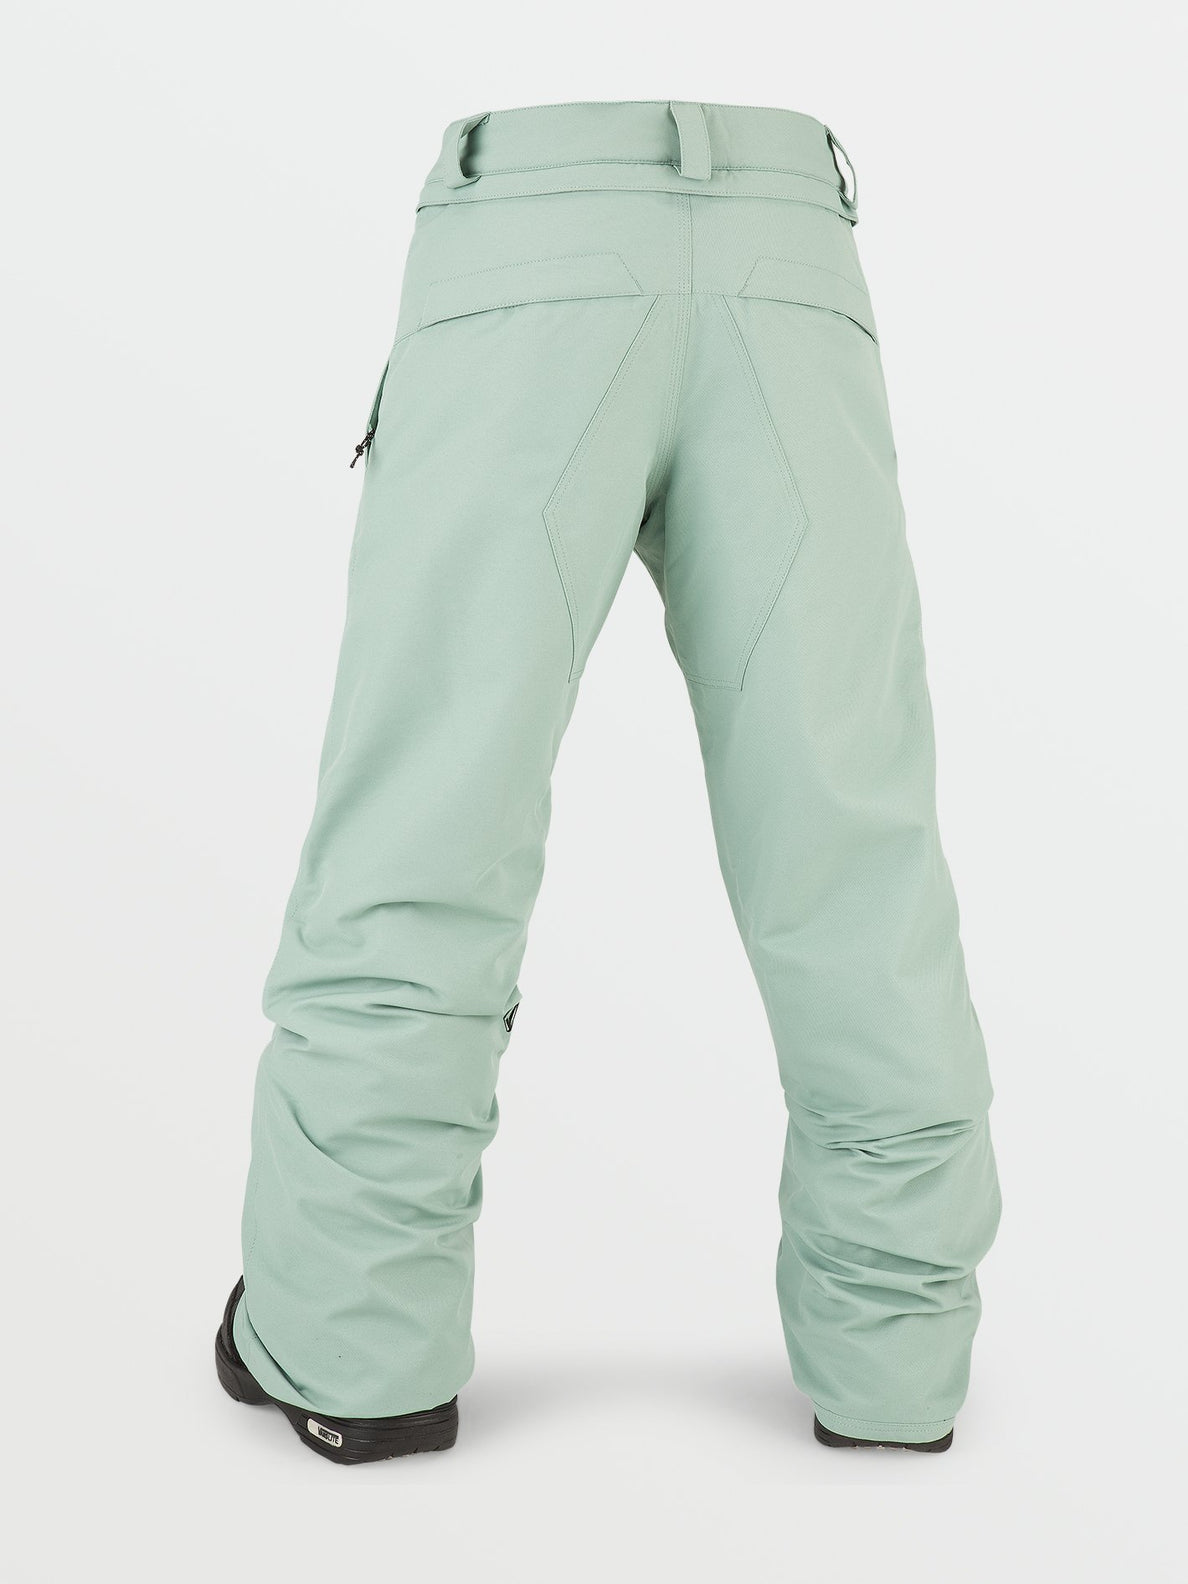 Frochickidee Insulated Trousers - MINT - (KIDS) (N1252202_MNT) [B]